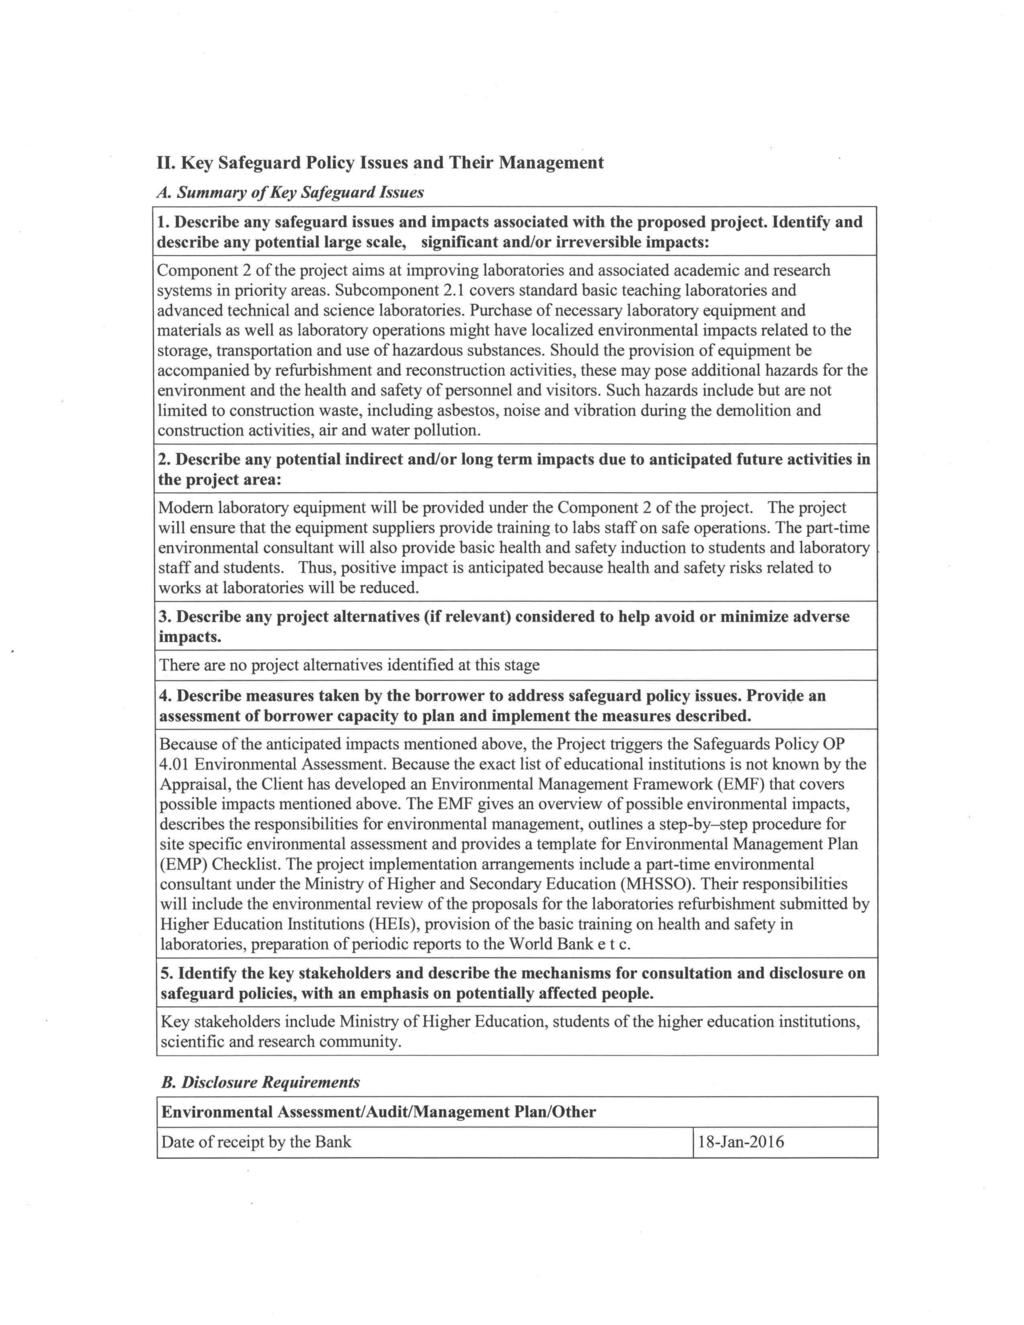 II. Key Safeguard Policy Issues and Their Management A. Summary of Key Safeguard Issues 1. Describe any safeguard issues and impacts associated with the proposed project.